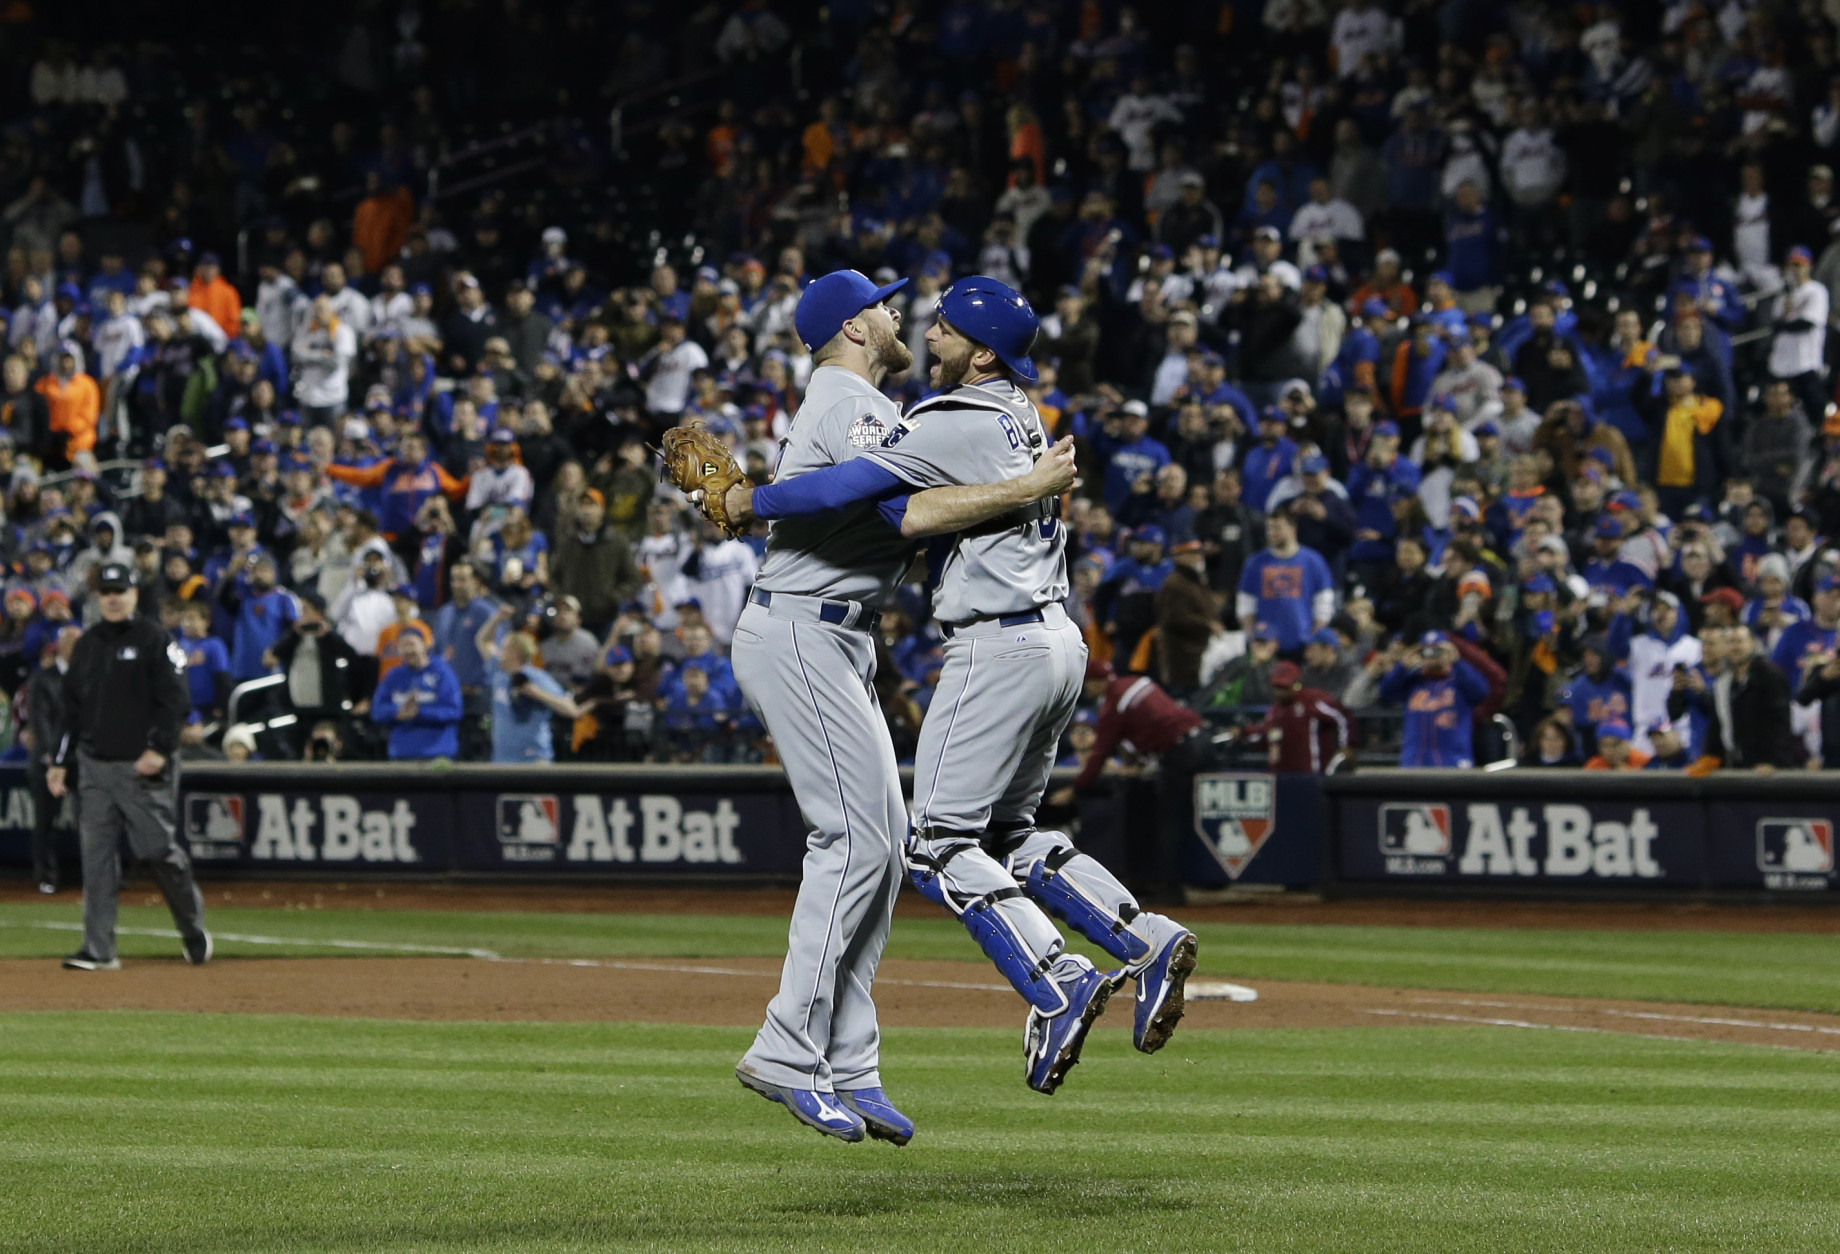 Kansas City Royals pitcher Wade Davis (17) celebrates with Drew Butera after Game 5 of the Major League Baseball World Series against the New York Mets Monday, Nov. 2, 2015, in New York. The Royals won 7-2 to win the series. (AP Photo/Matt Slocum)